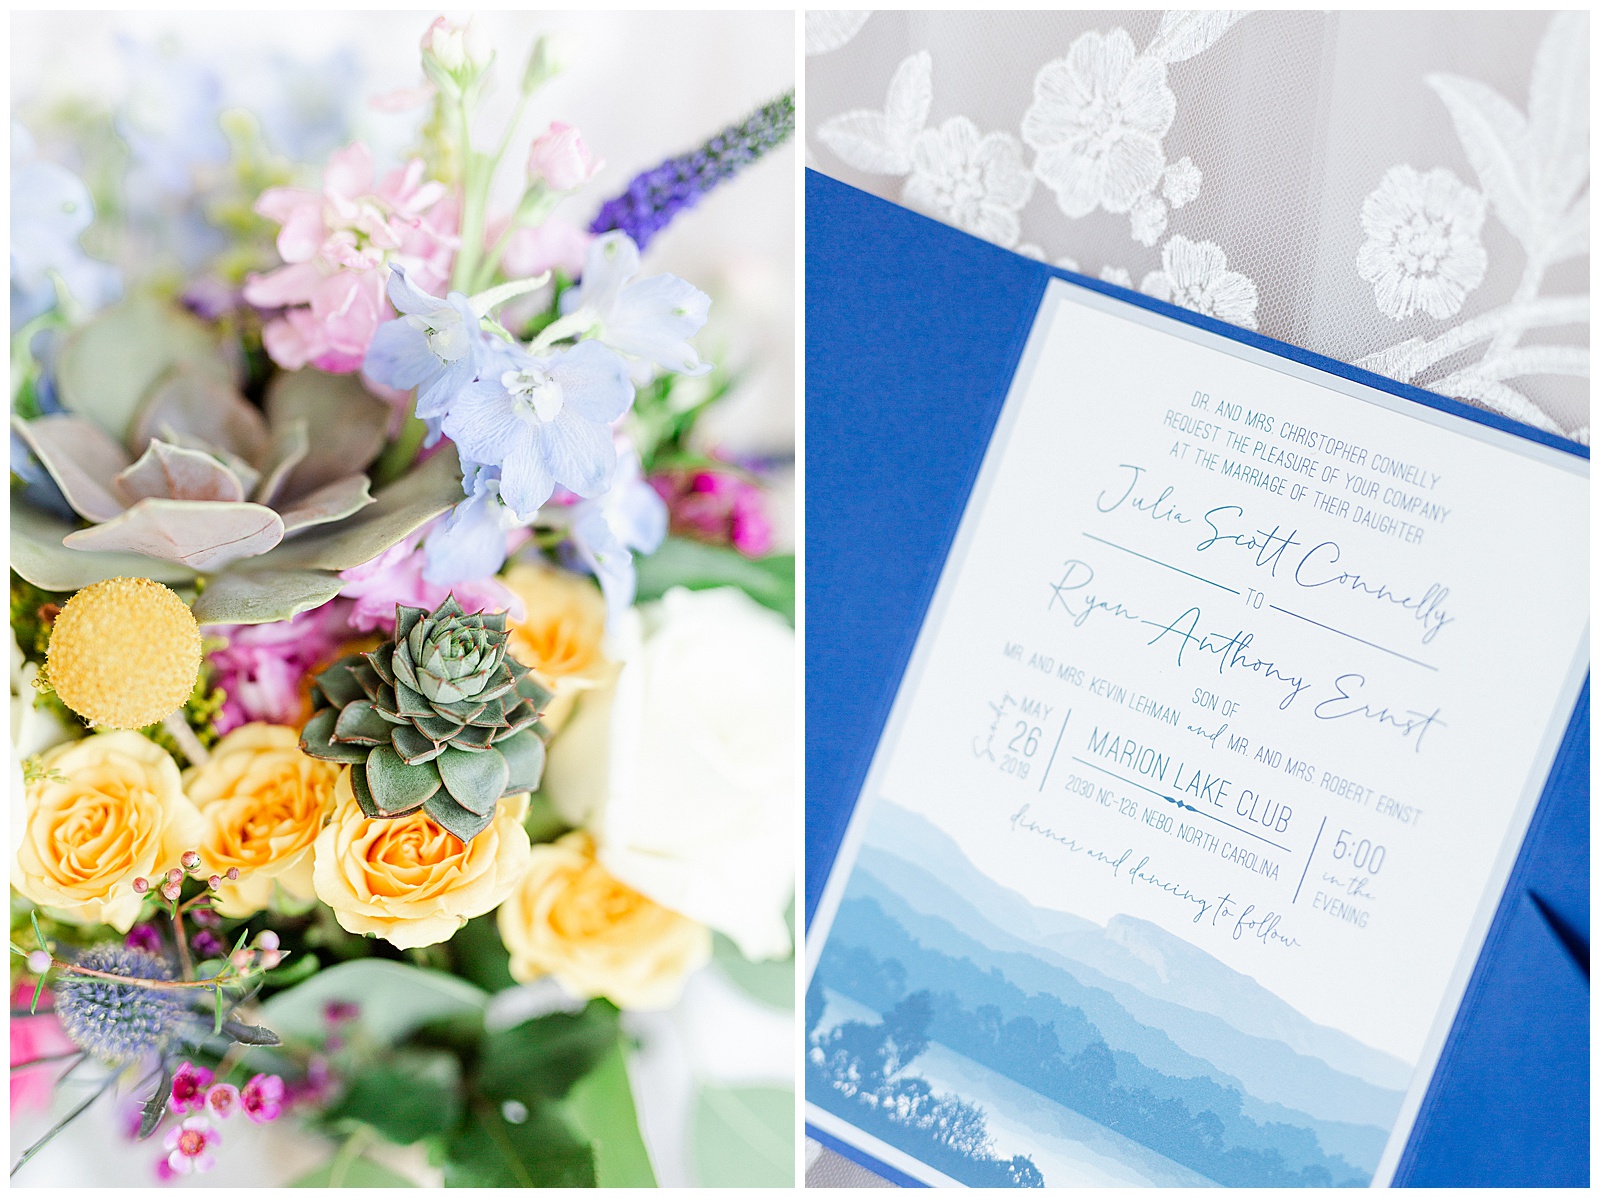 Blue Wedding Invitation and Colorful Bouquet from Outdoorsy Summer Wedding at North Carolina Lakehouse in the Mountains | check out the full wedding at KevynDixonPhoto.com